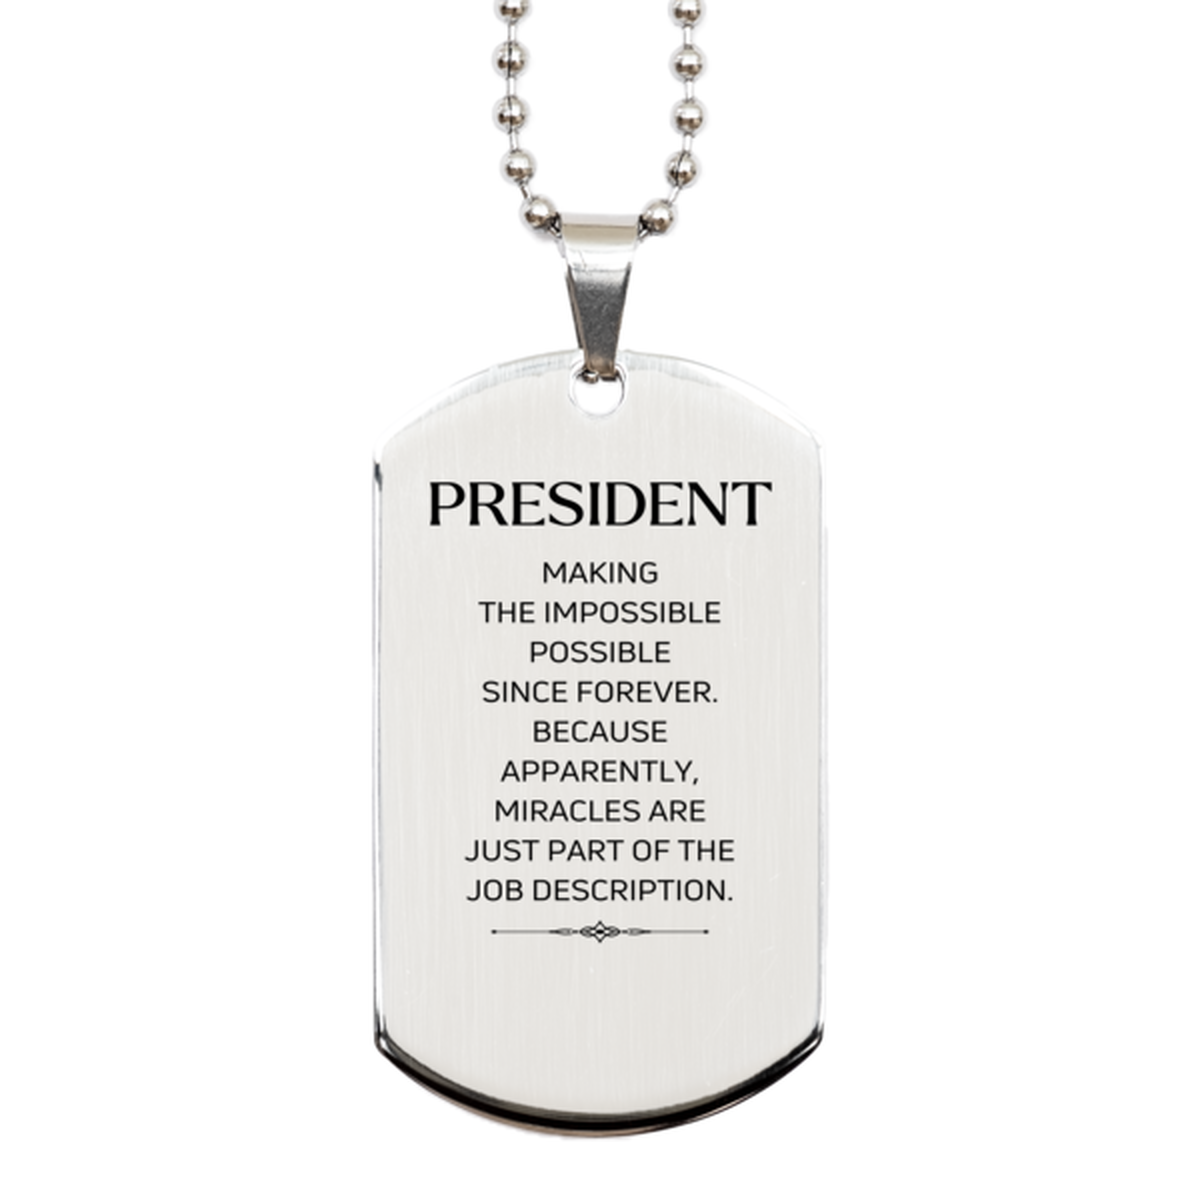 Funny President Gifts, Miracles are just part of the job description, Inspirational Birthday Silver Dog Tag For President, Men, Women, Coworkers, Friends, Boss